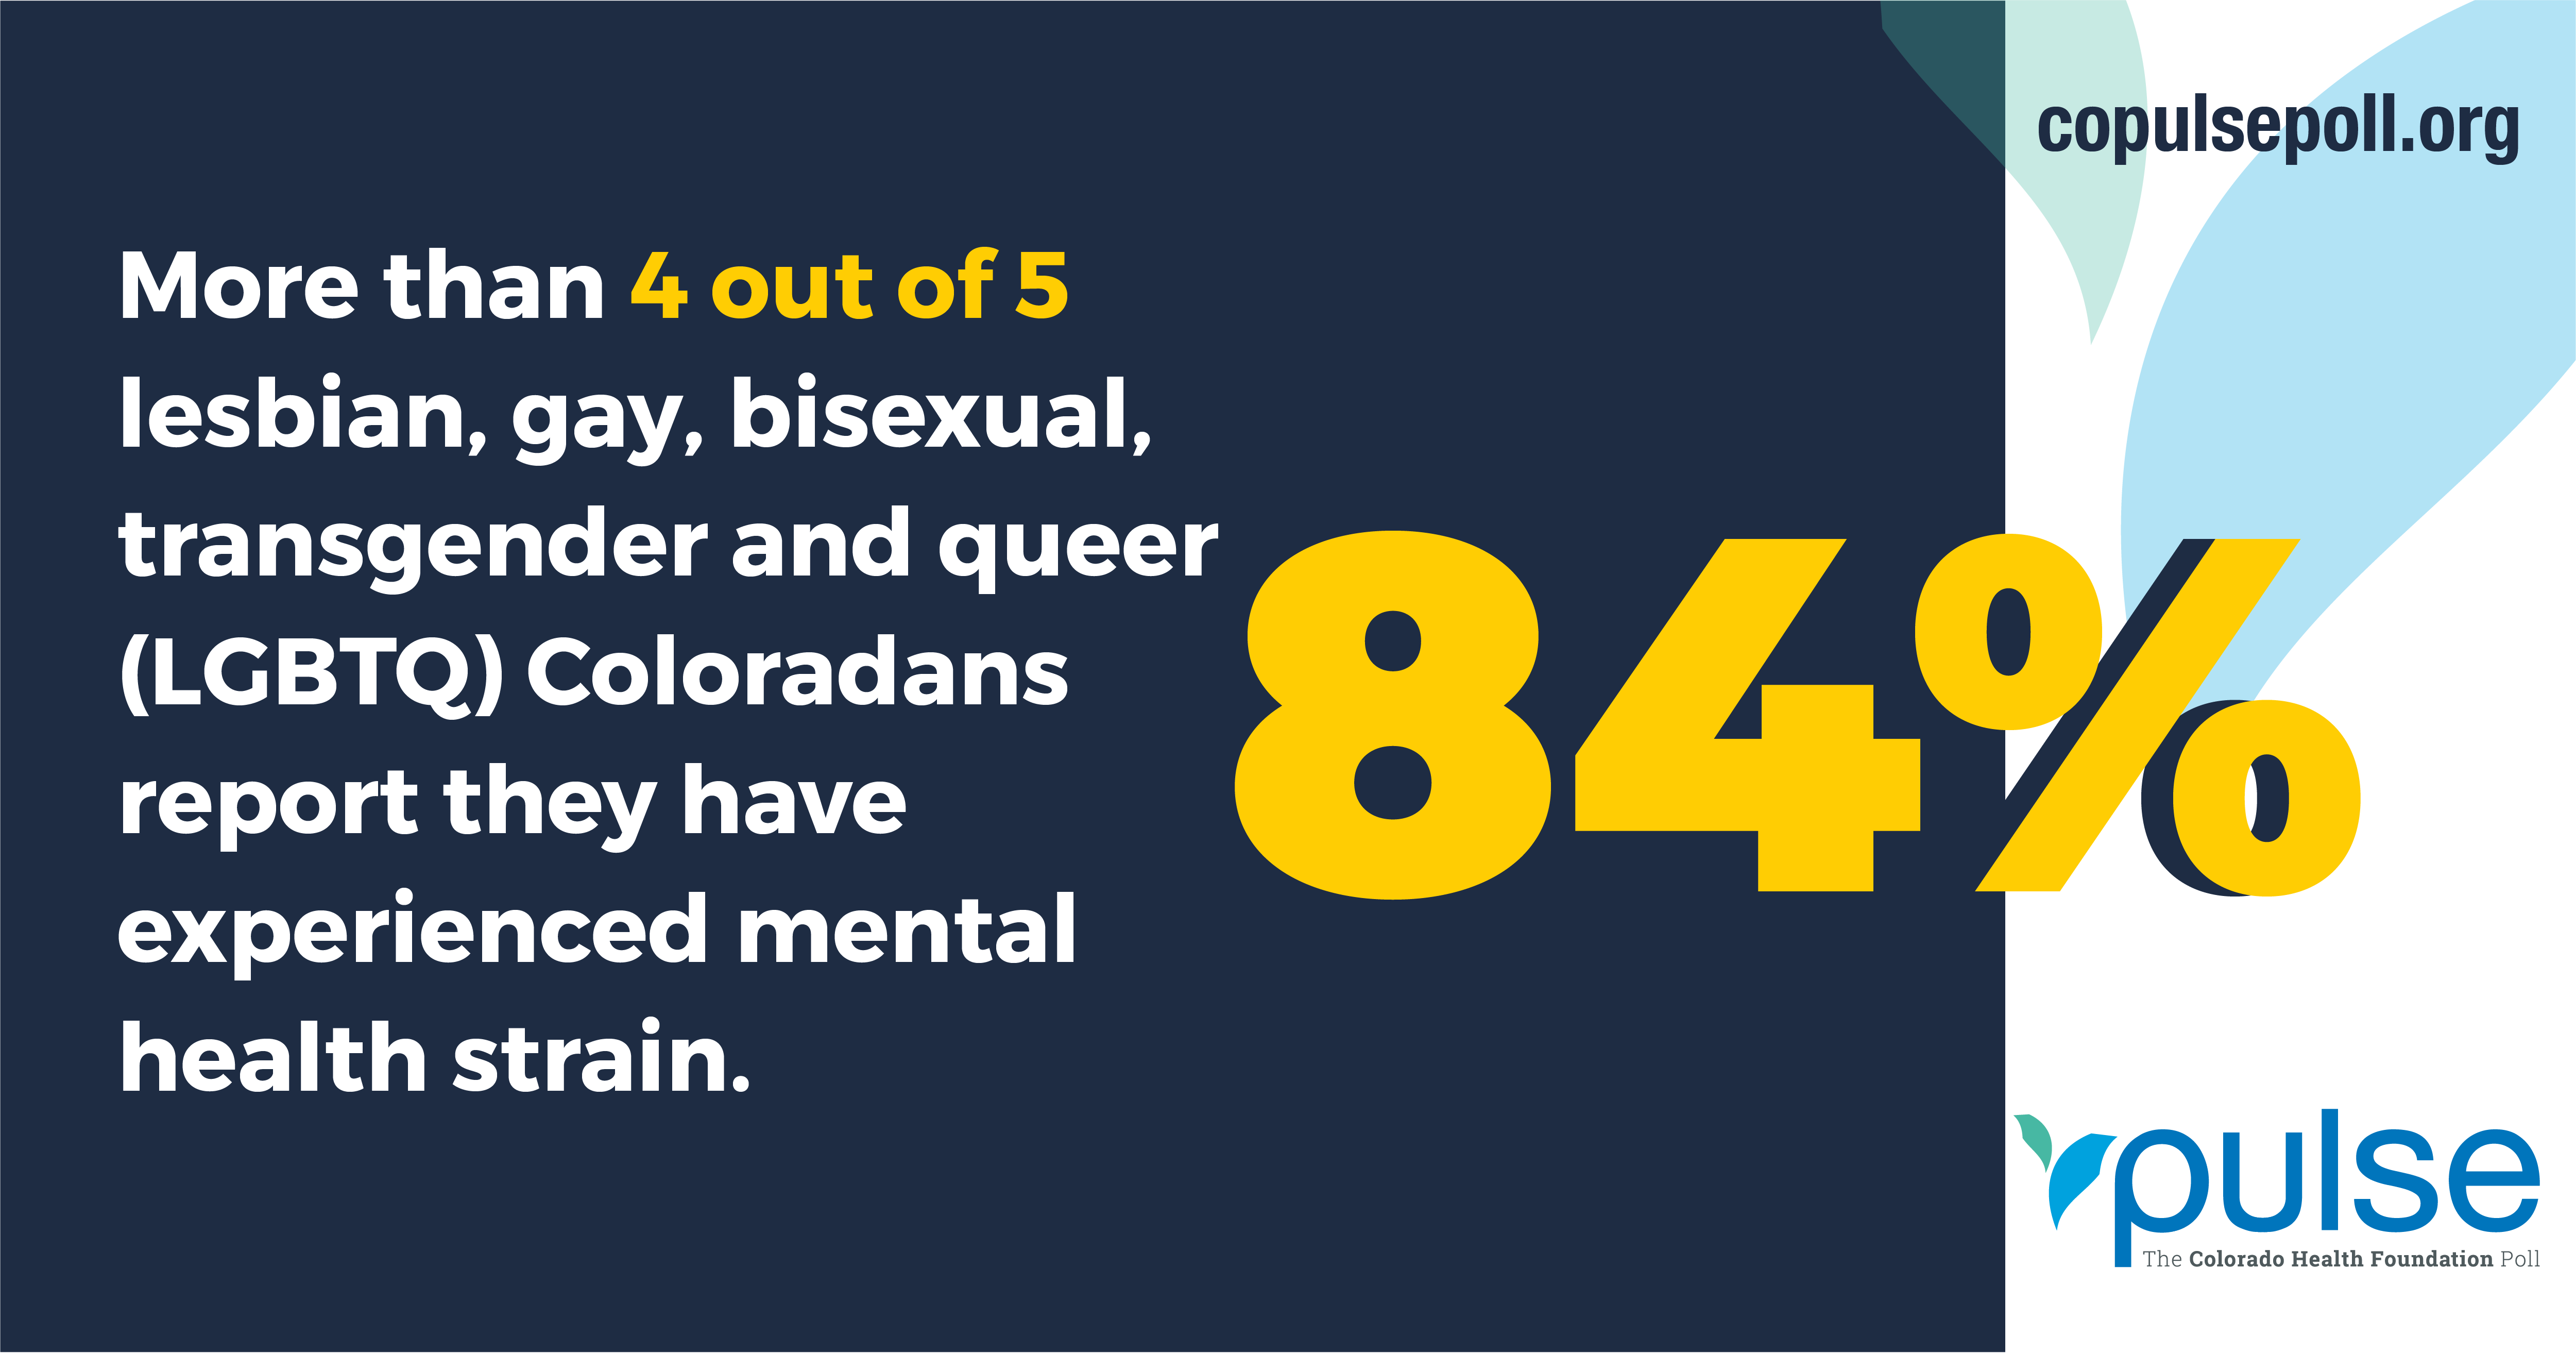 GRAPHIC: 84% of LGBTQ Coloradans report they have experienced mental health strain.